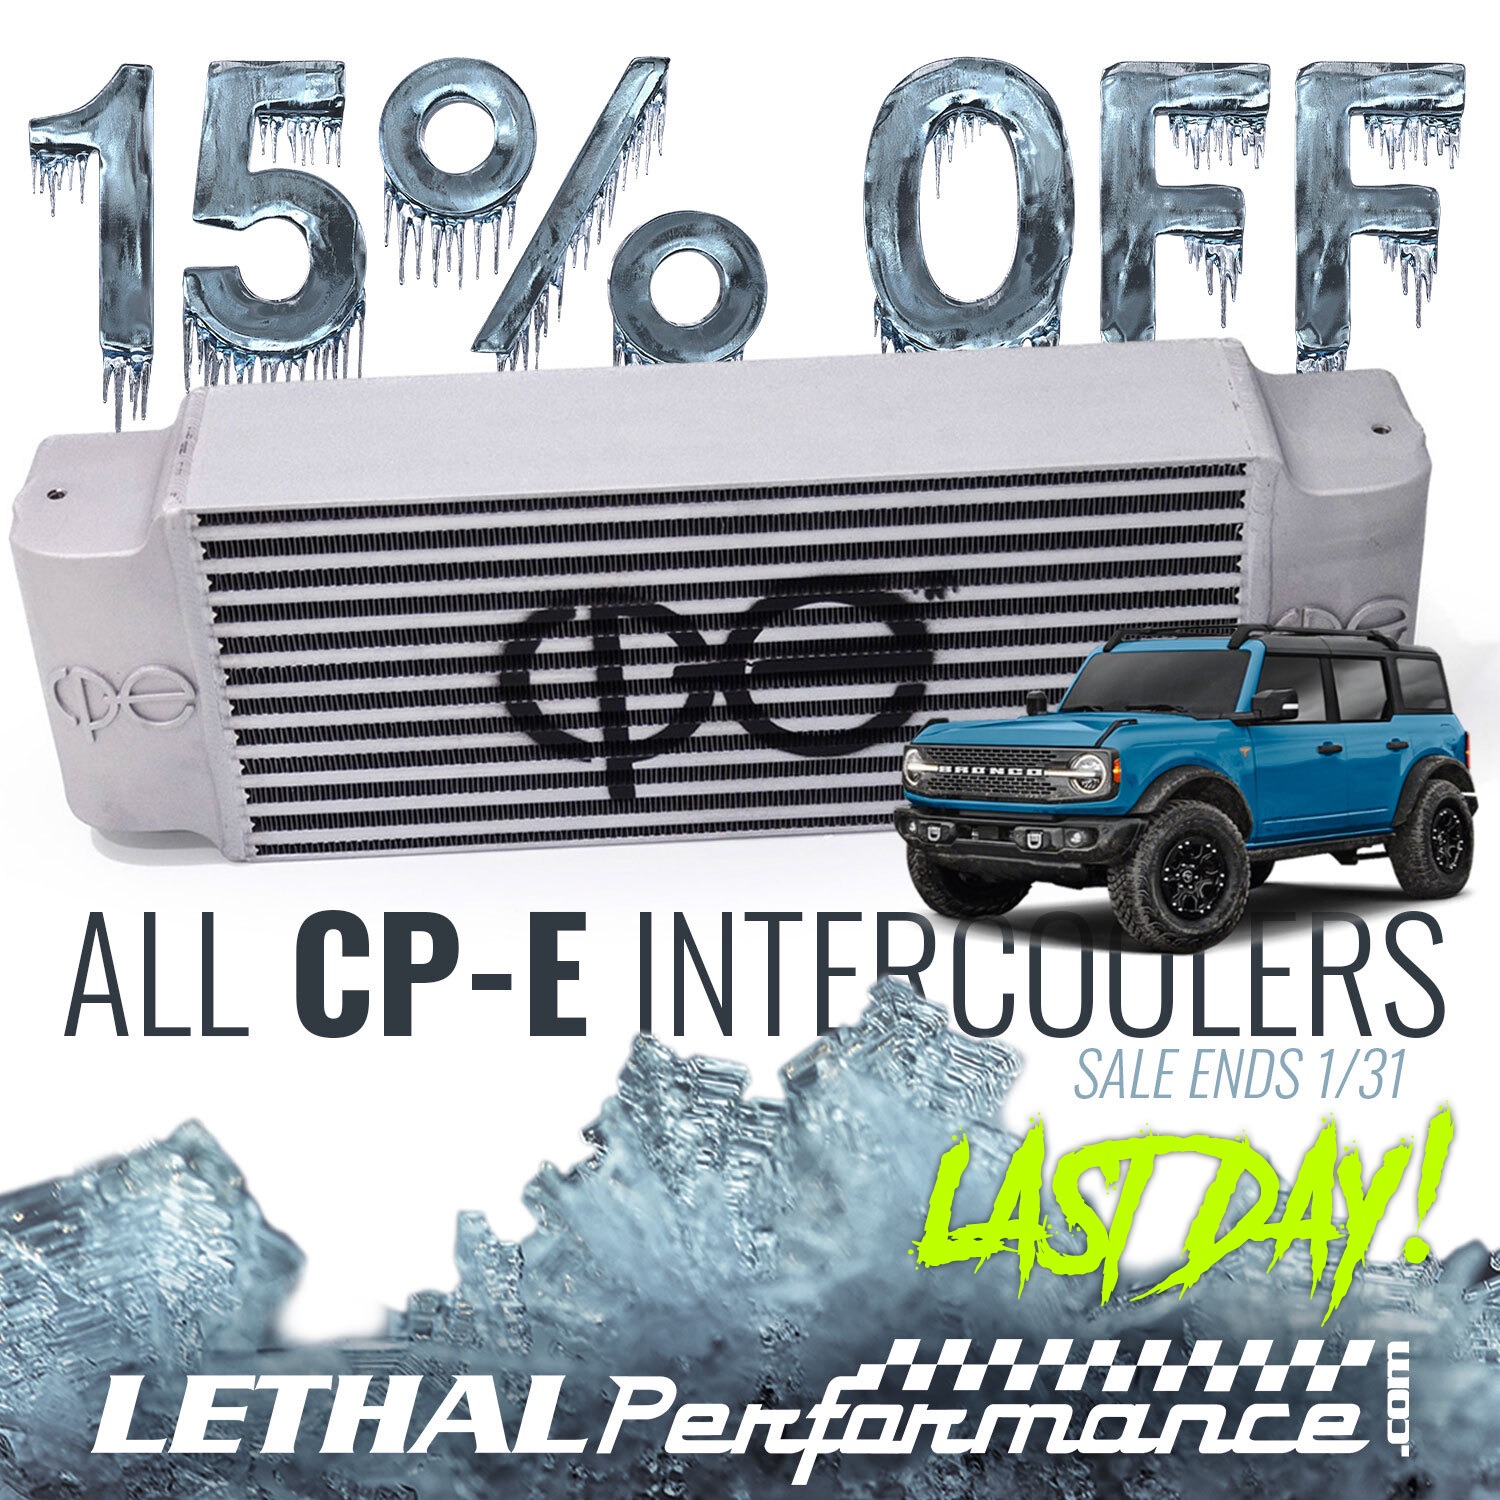 Ford Bronco NEW CP-E INTERCOOLER + 15% OFF! - Lethal Performance cpe_bronco last